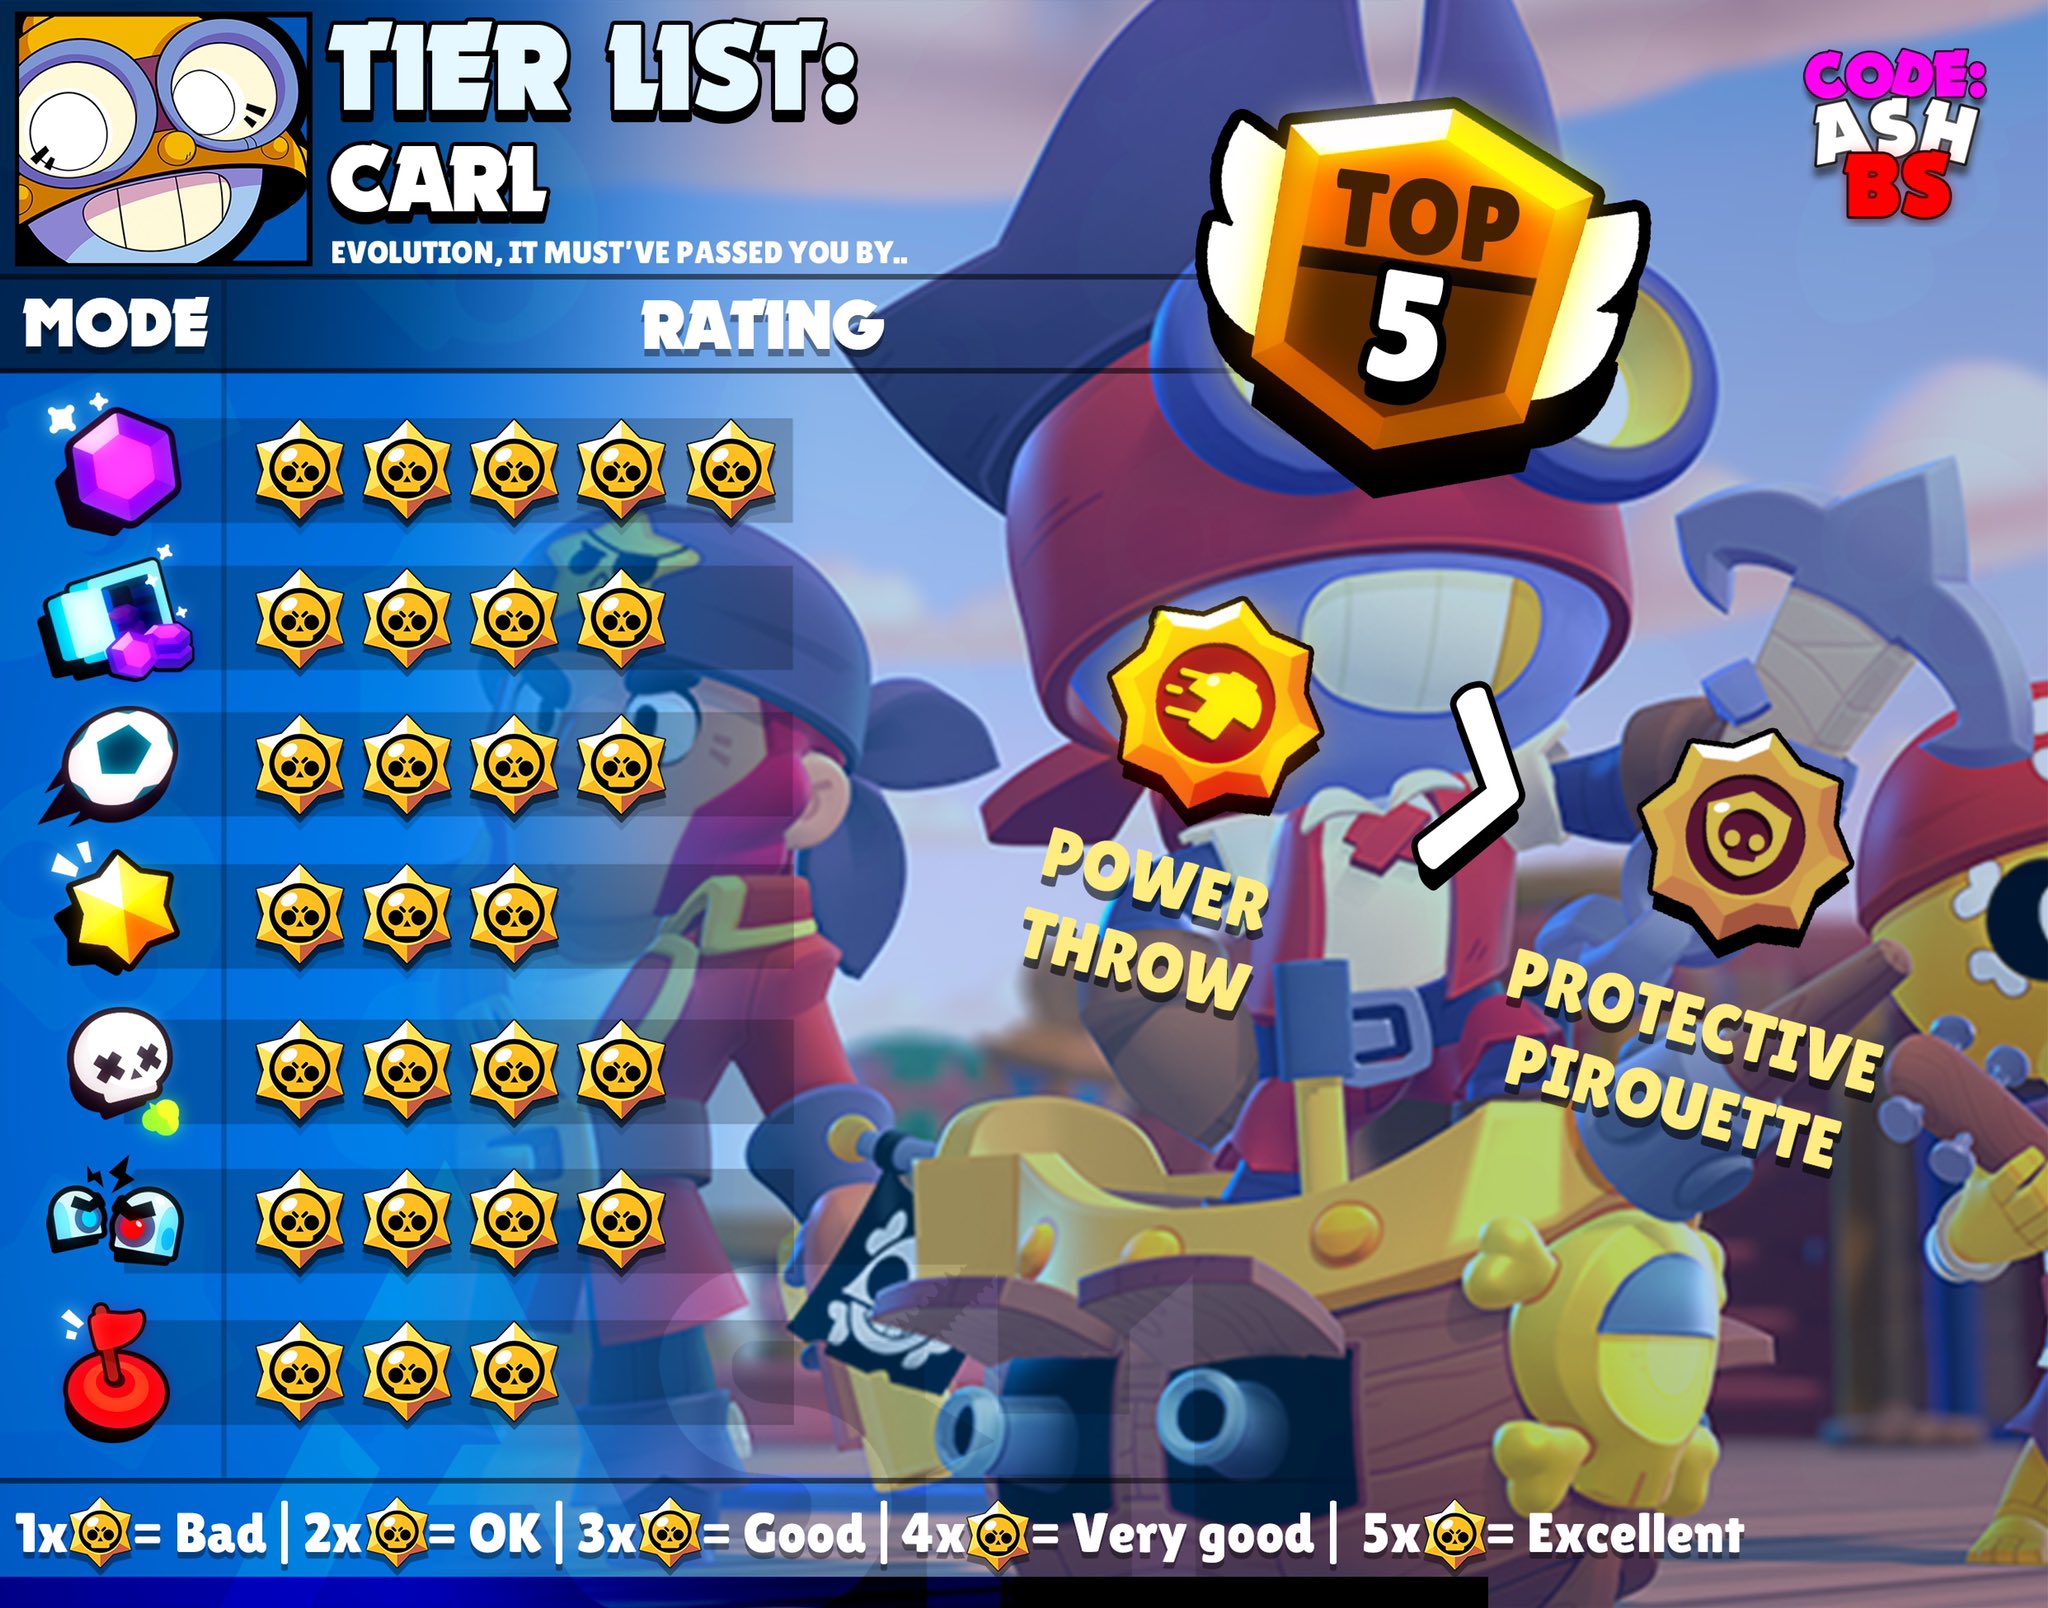 Code Ashbs On Twitter Carl Tier List For Every Game Mode Along With The Best Maps And Suggested Comps He S One Of The Best Brawlers In The Game Good Everywhere Carl Brawlstars - brawl stars is carl good